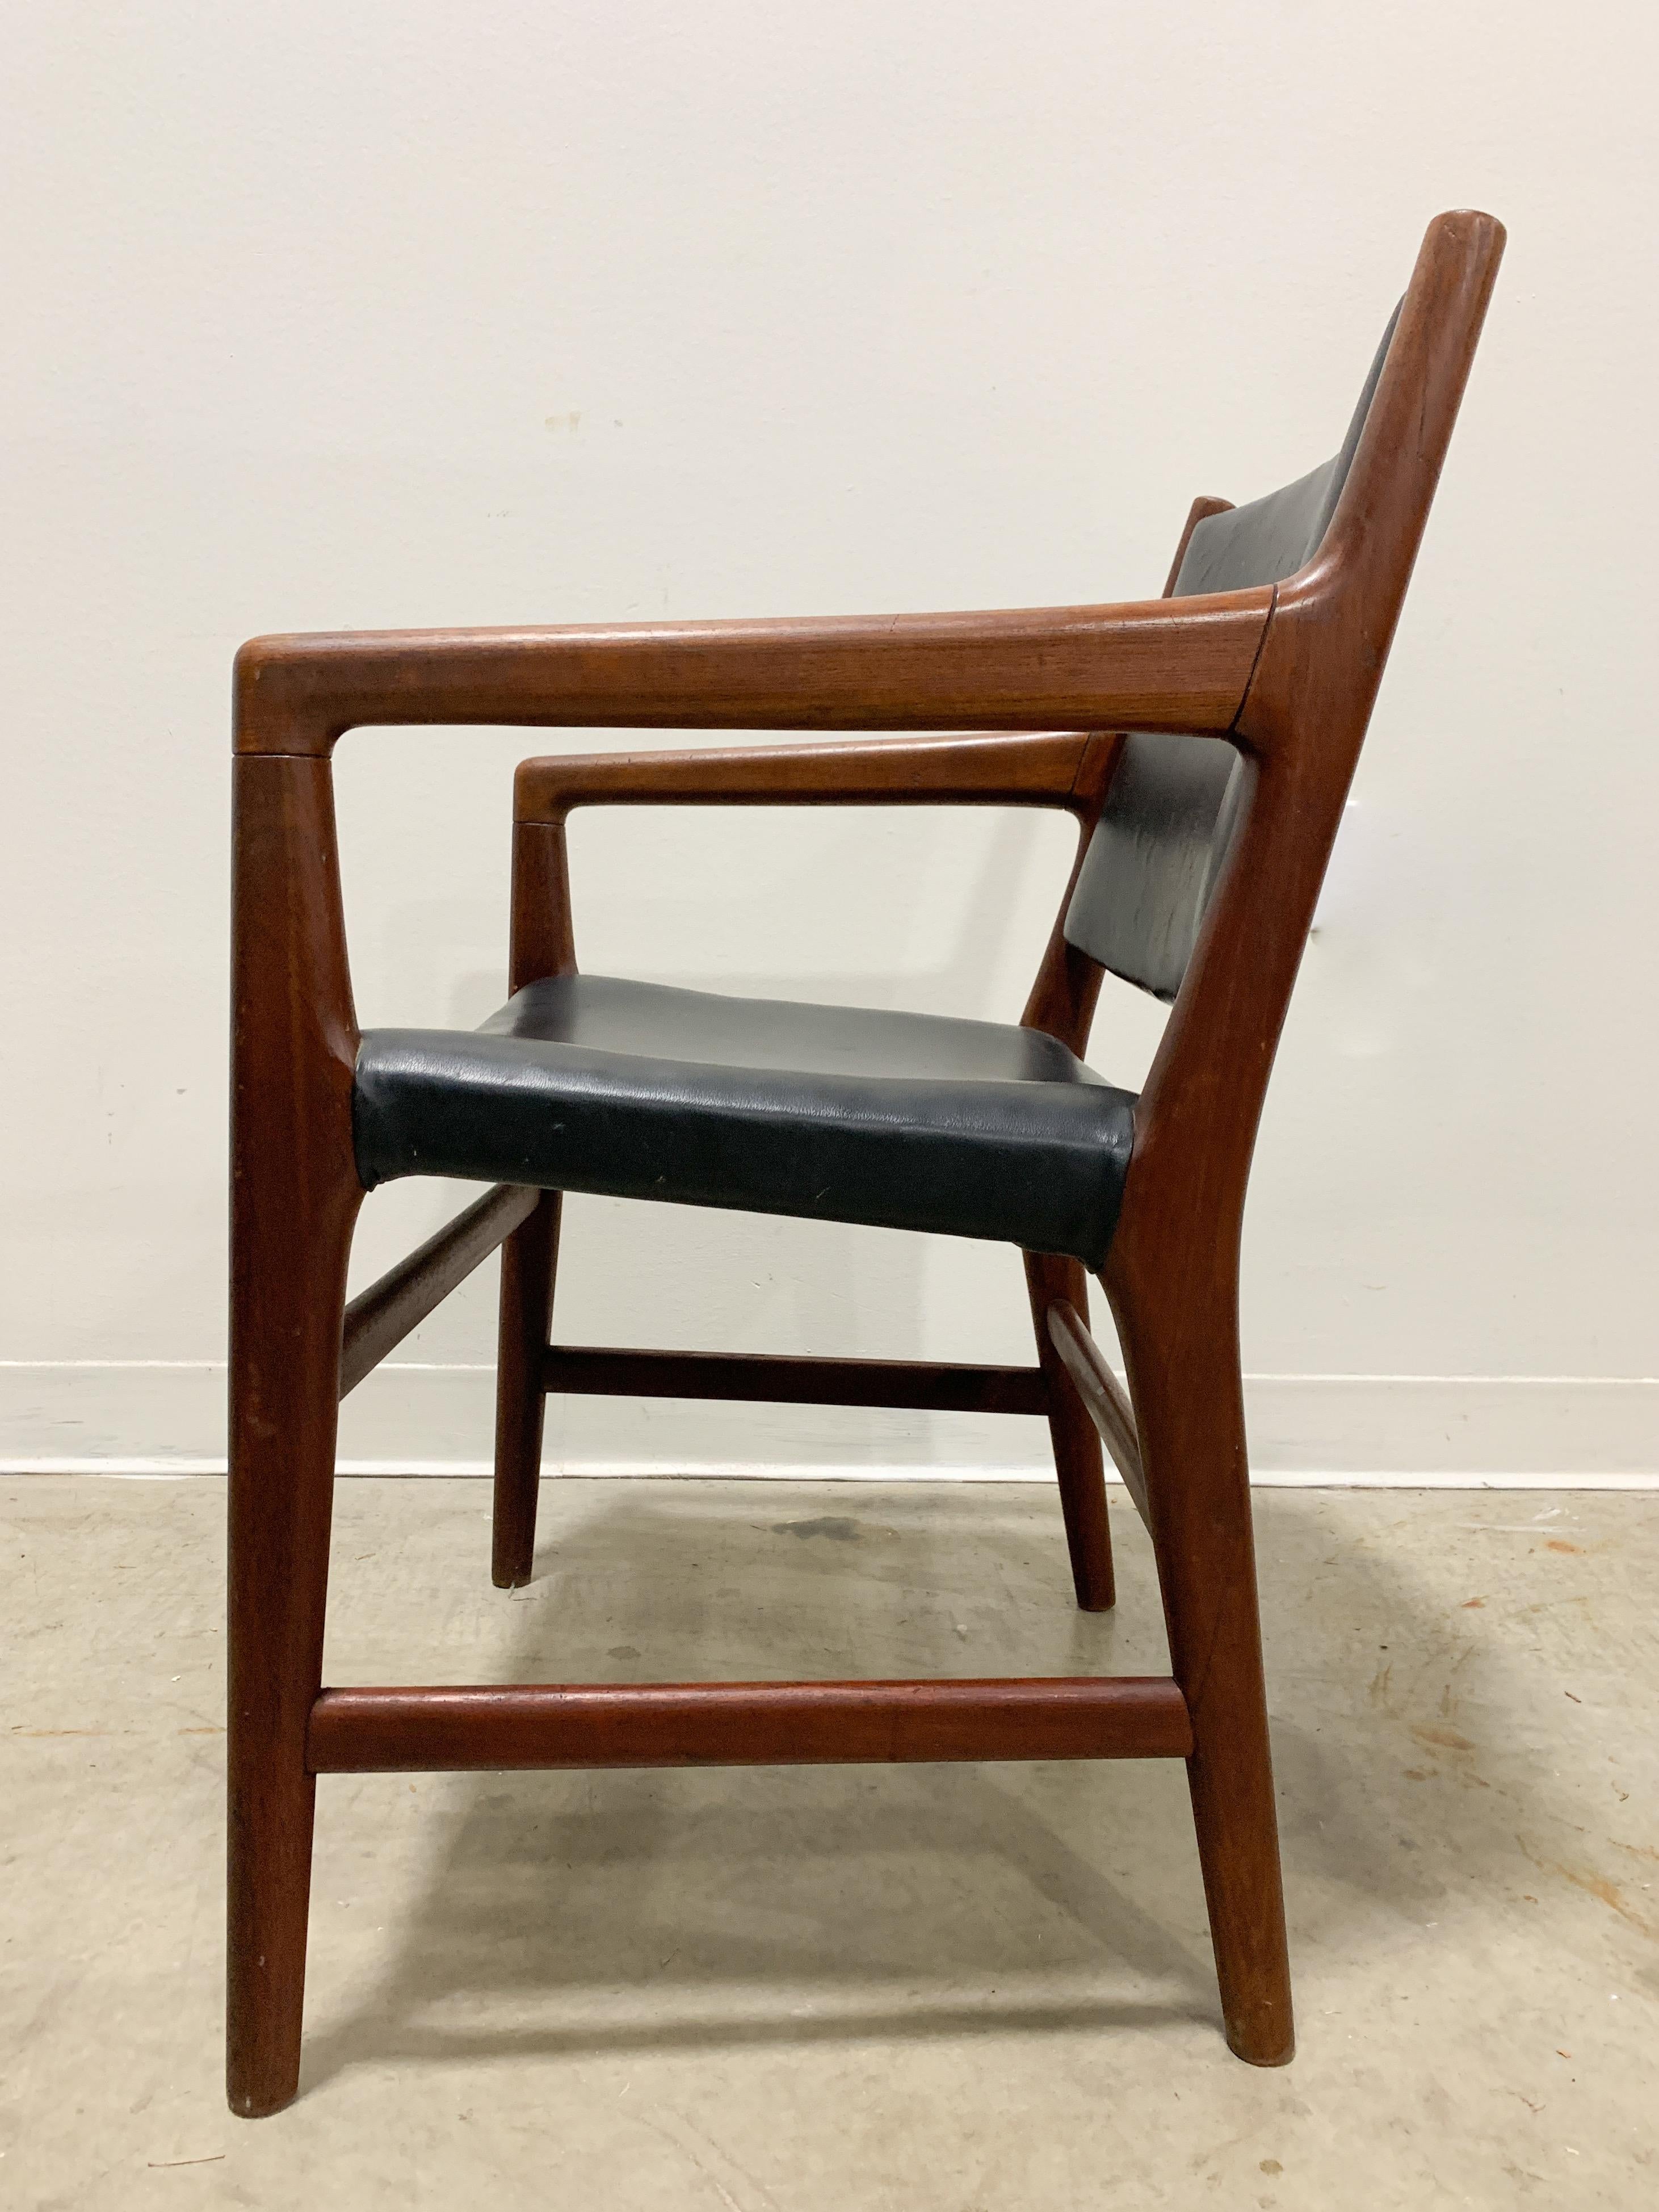 Hans Wegner JH-507 Armchair in Teak and Leather In Good Condition For Sale In Kalamazoo, MI